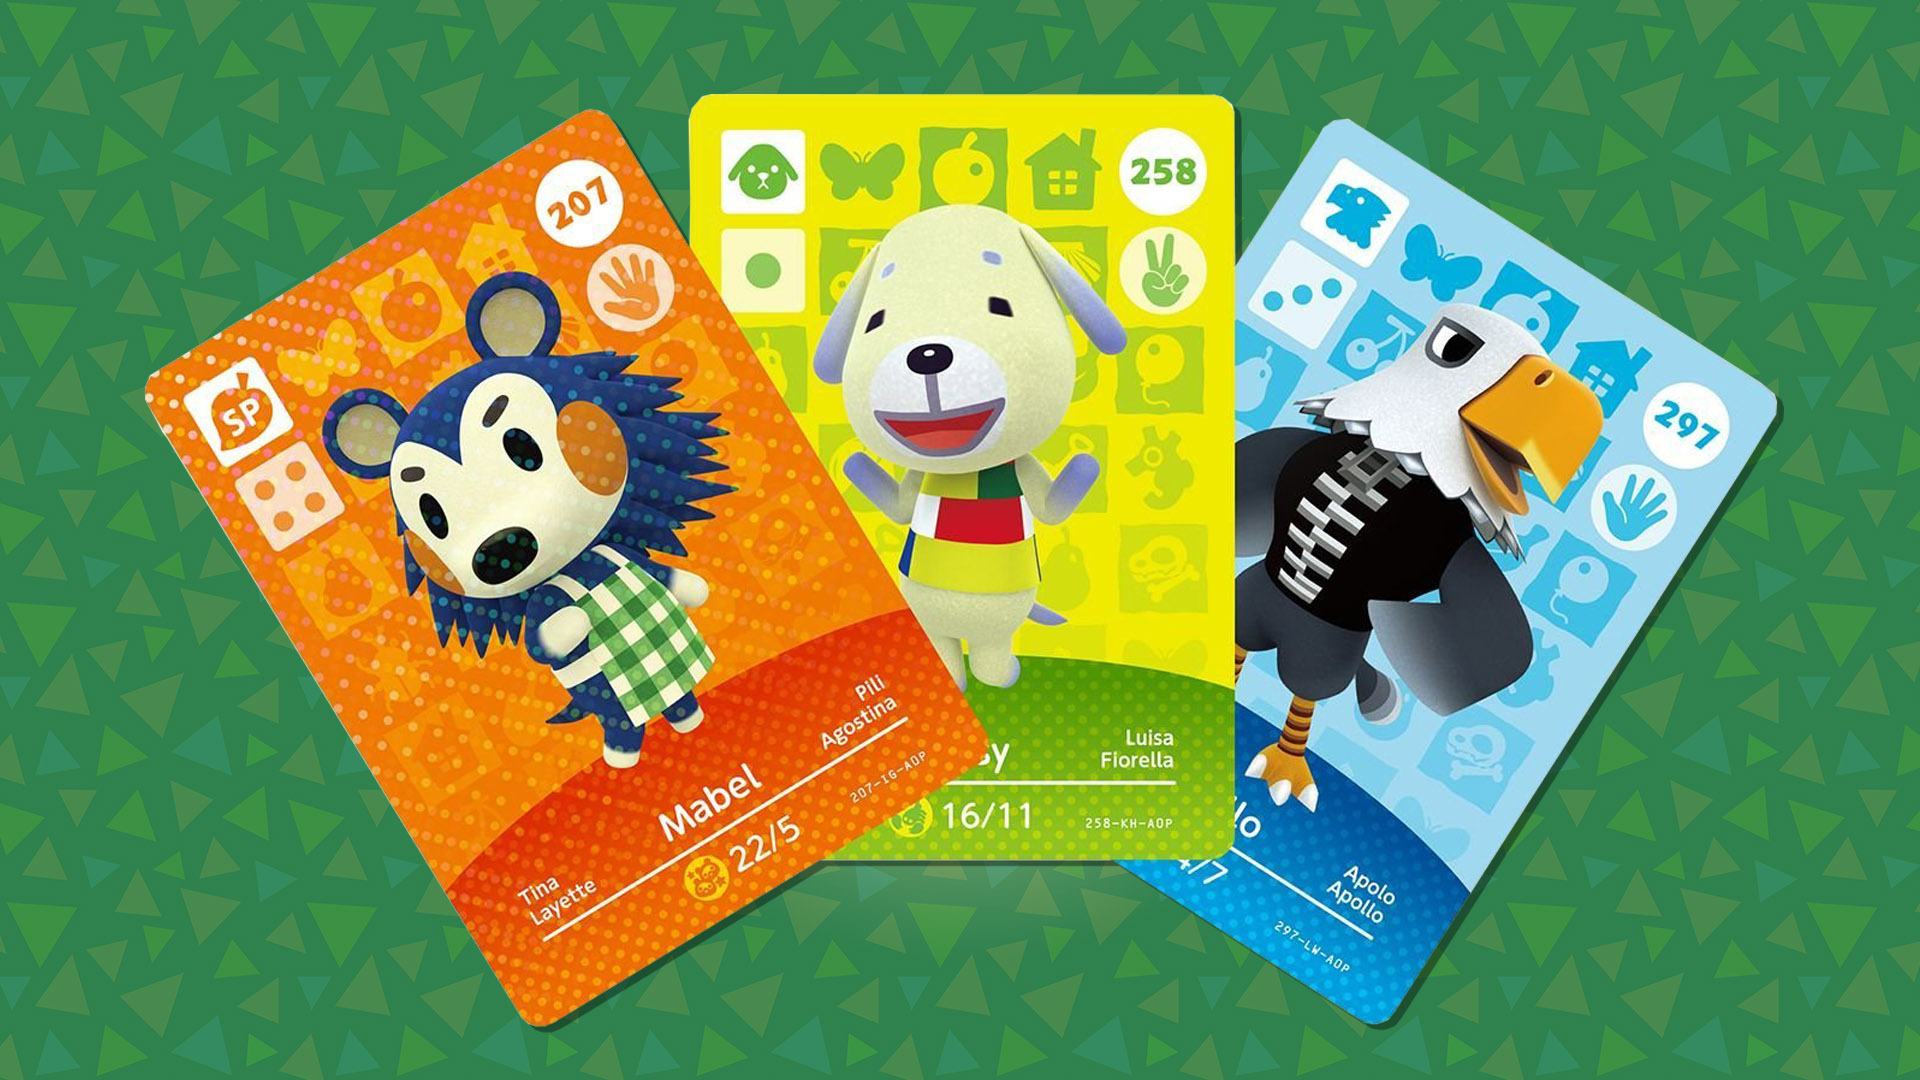 amiibo cards in store